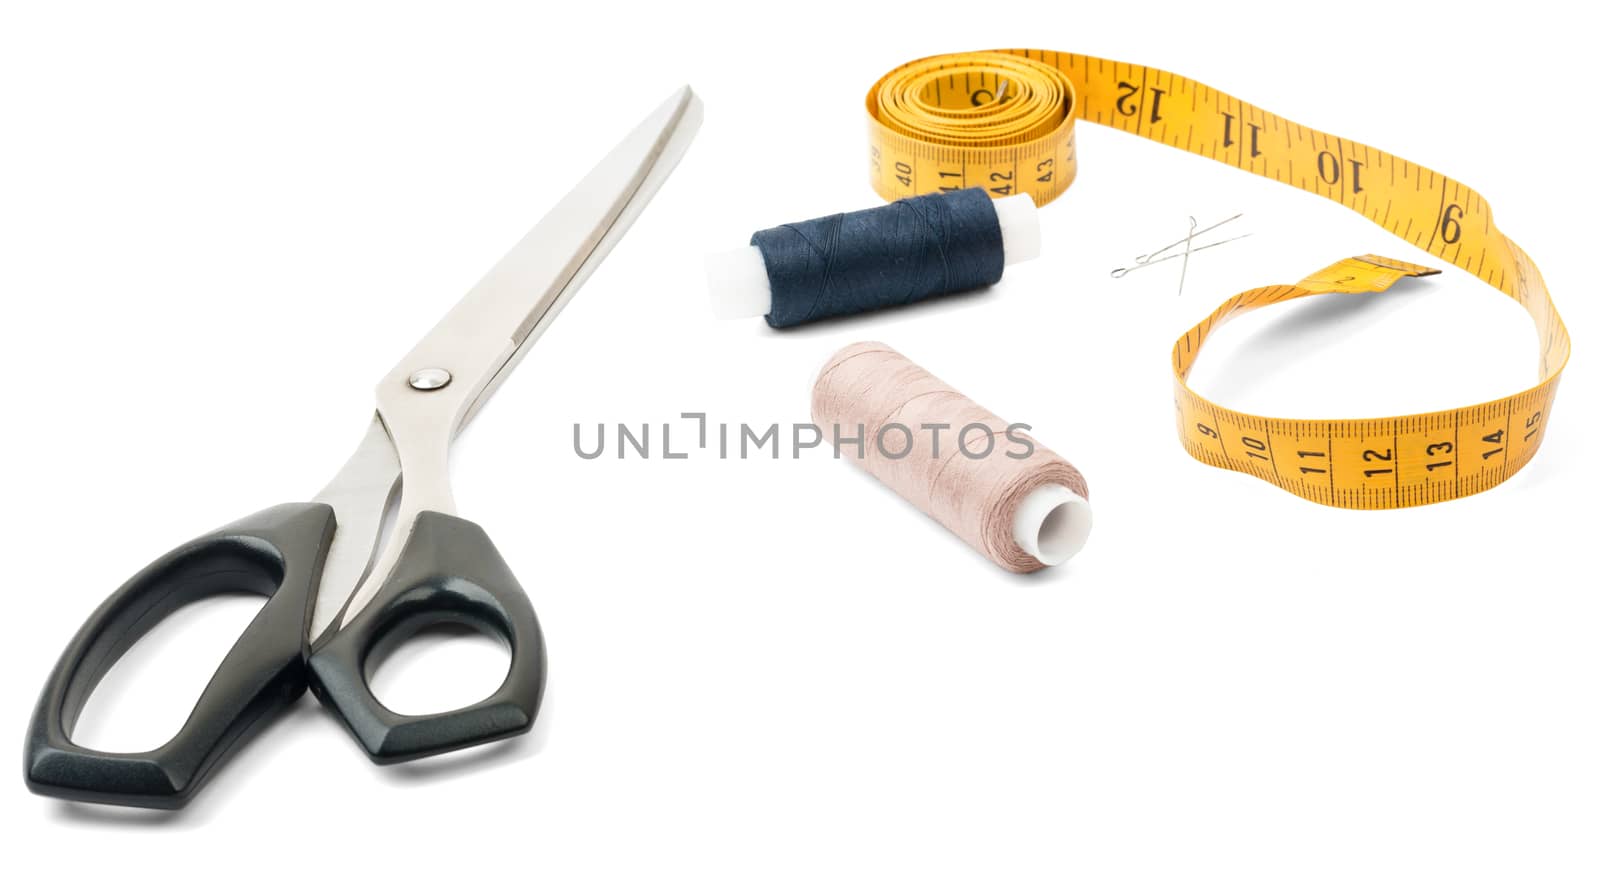 Tailors tools - scissors, thread and tape measure by cherezoff